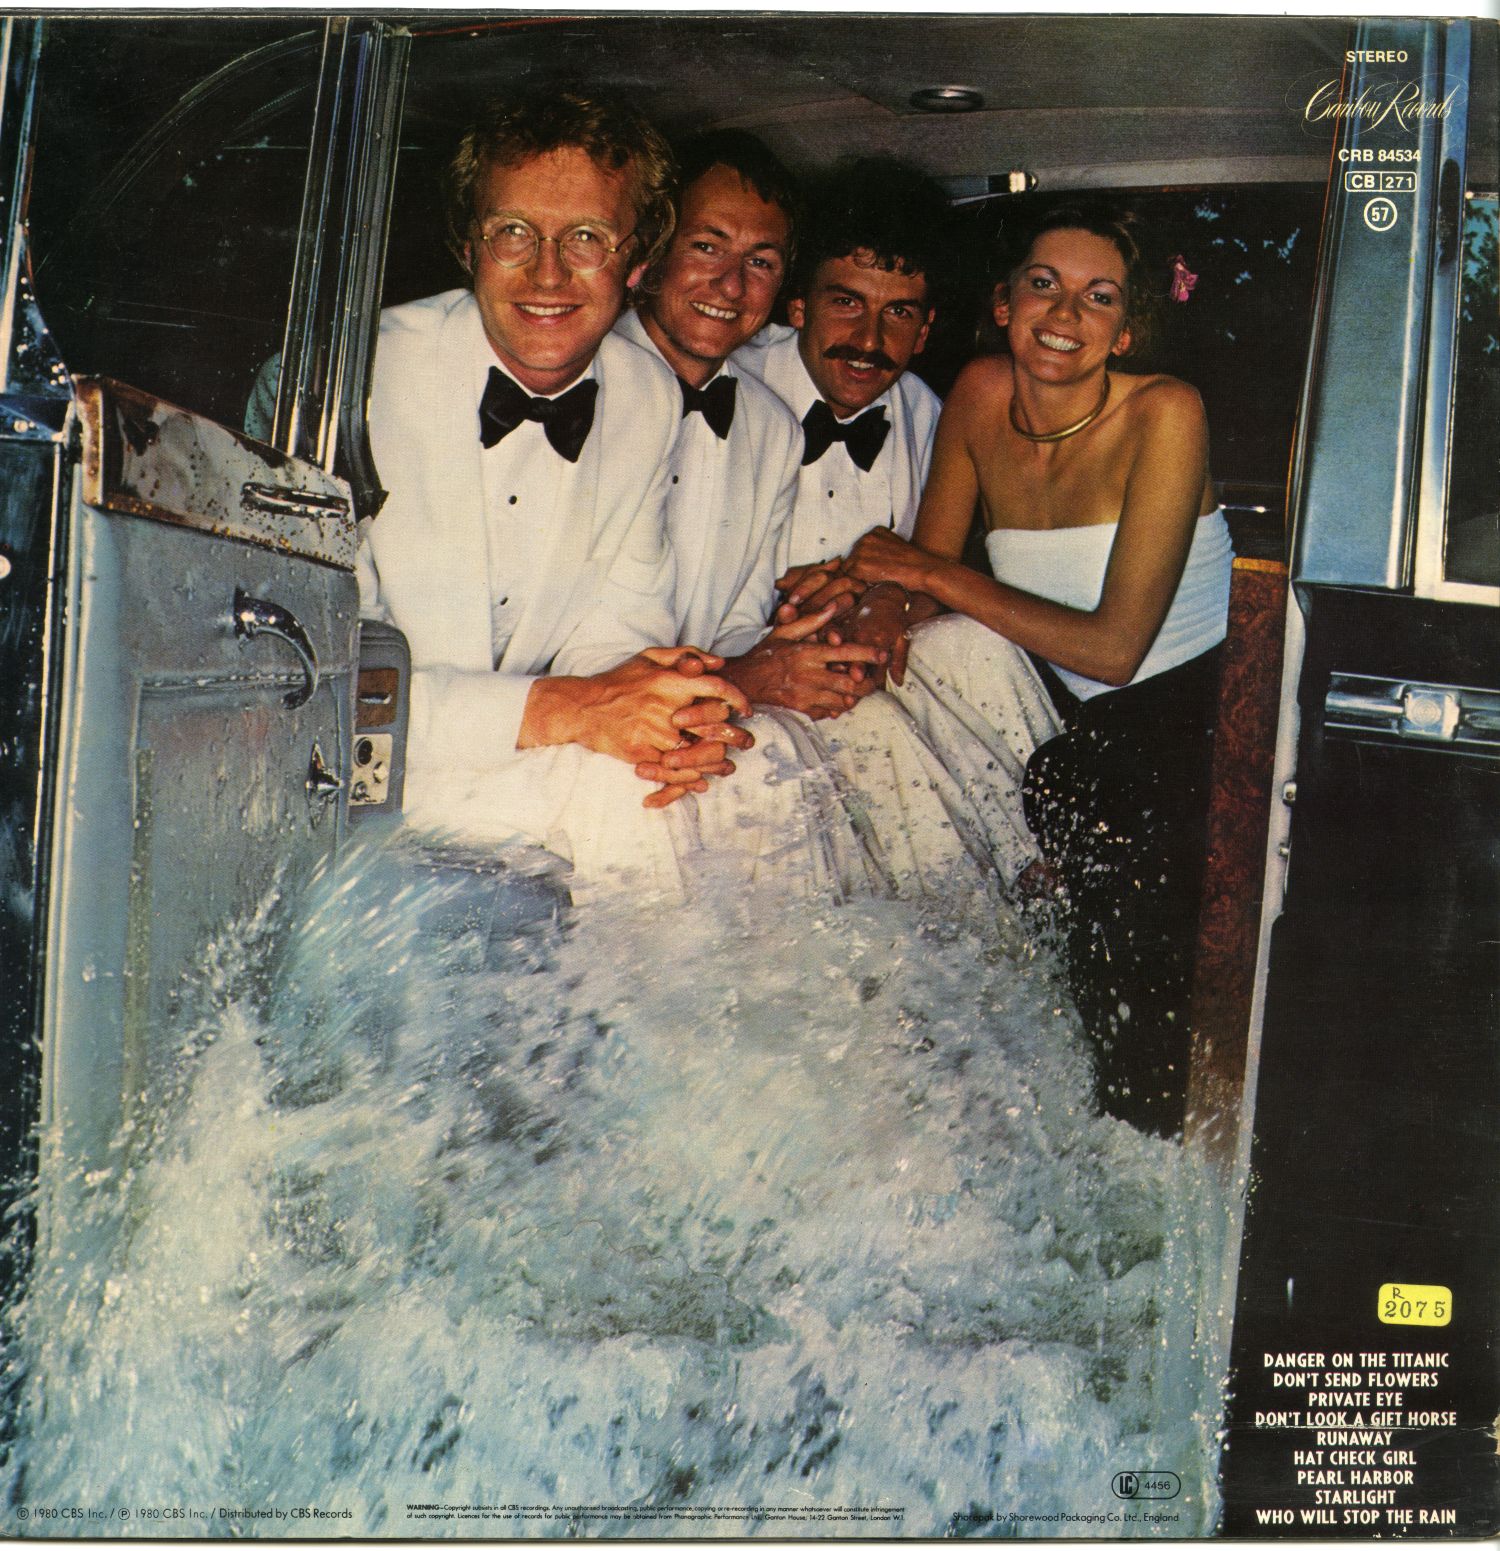 SAILOR『DRESSED FOR DROWNING』（1980年、Calibou Records）アルバムジャケット02